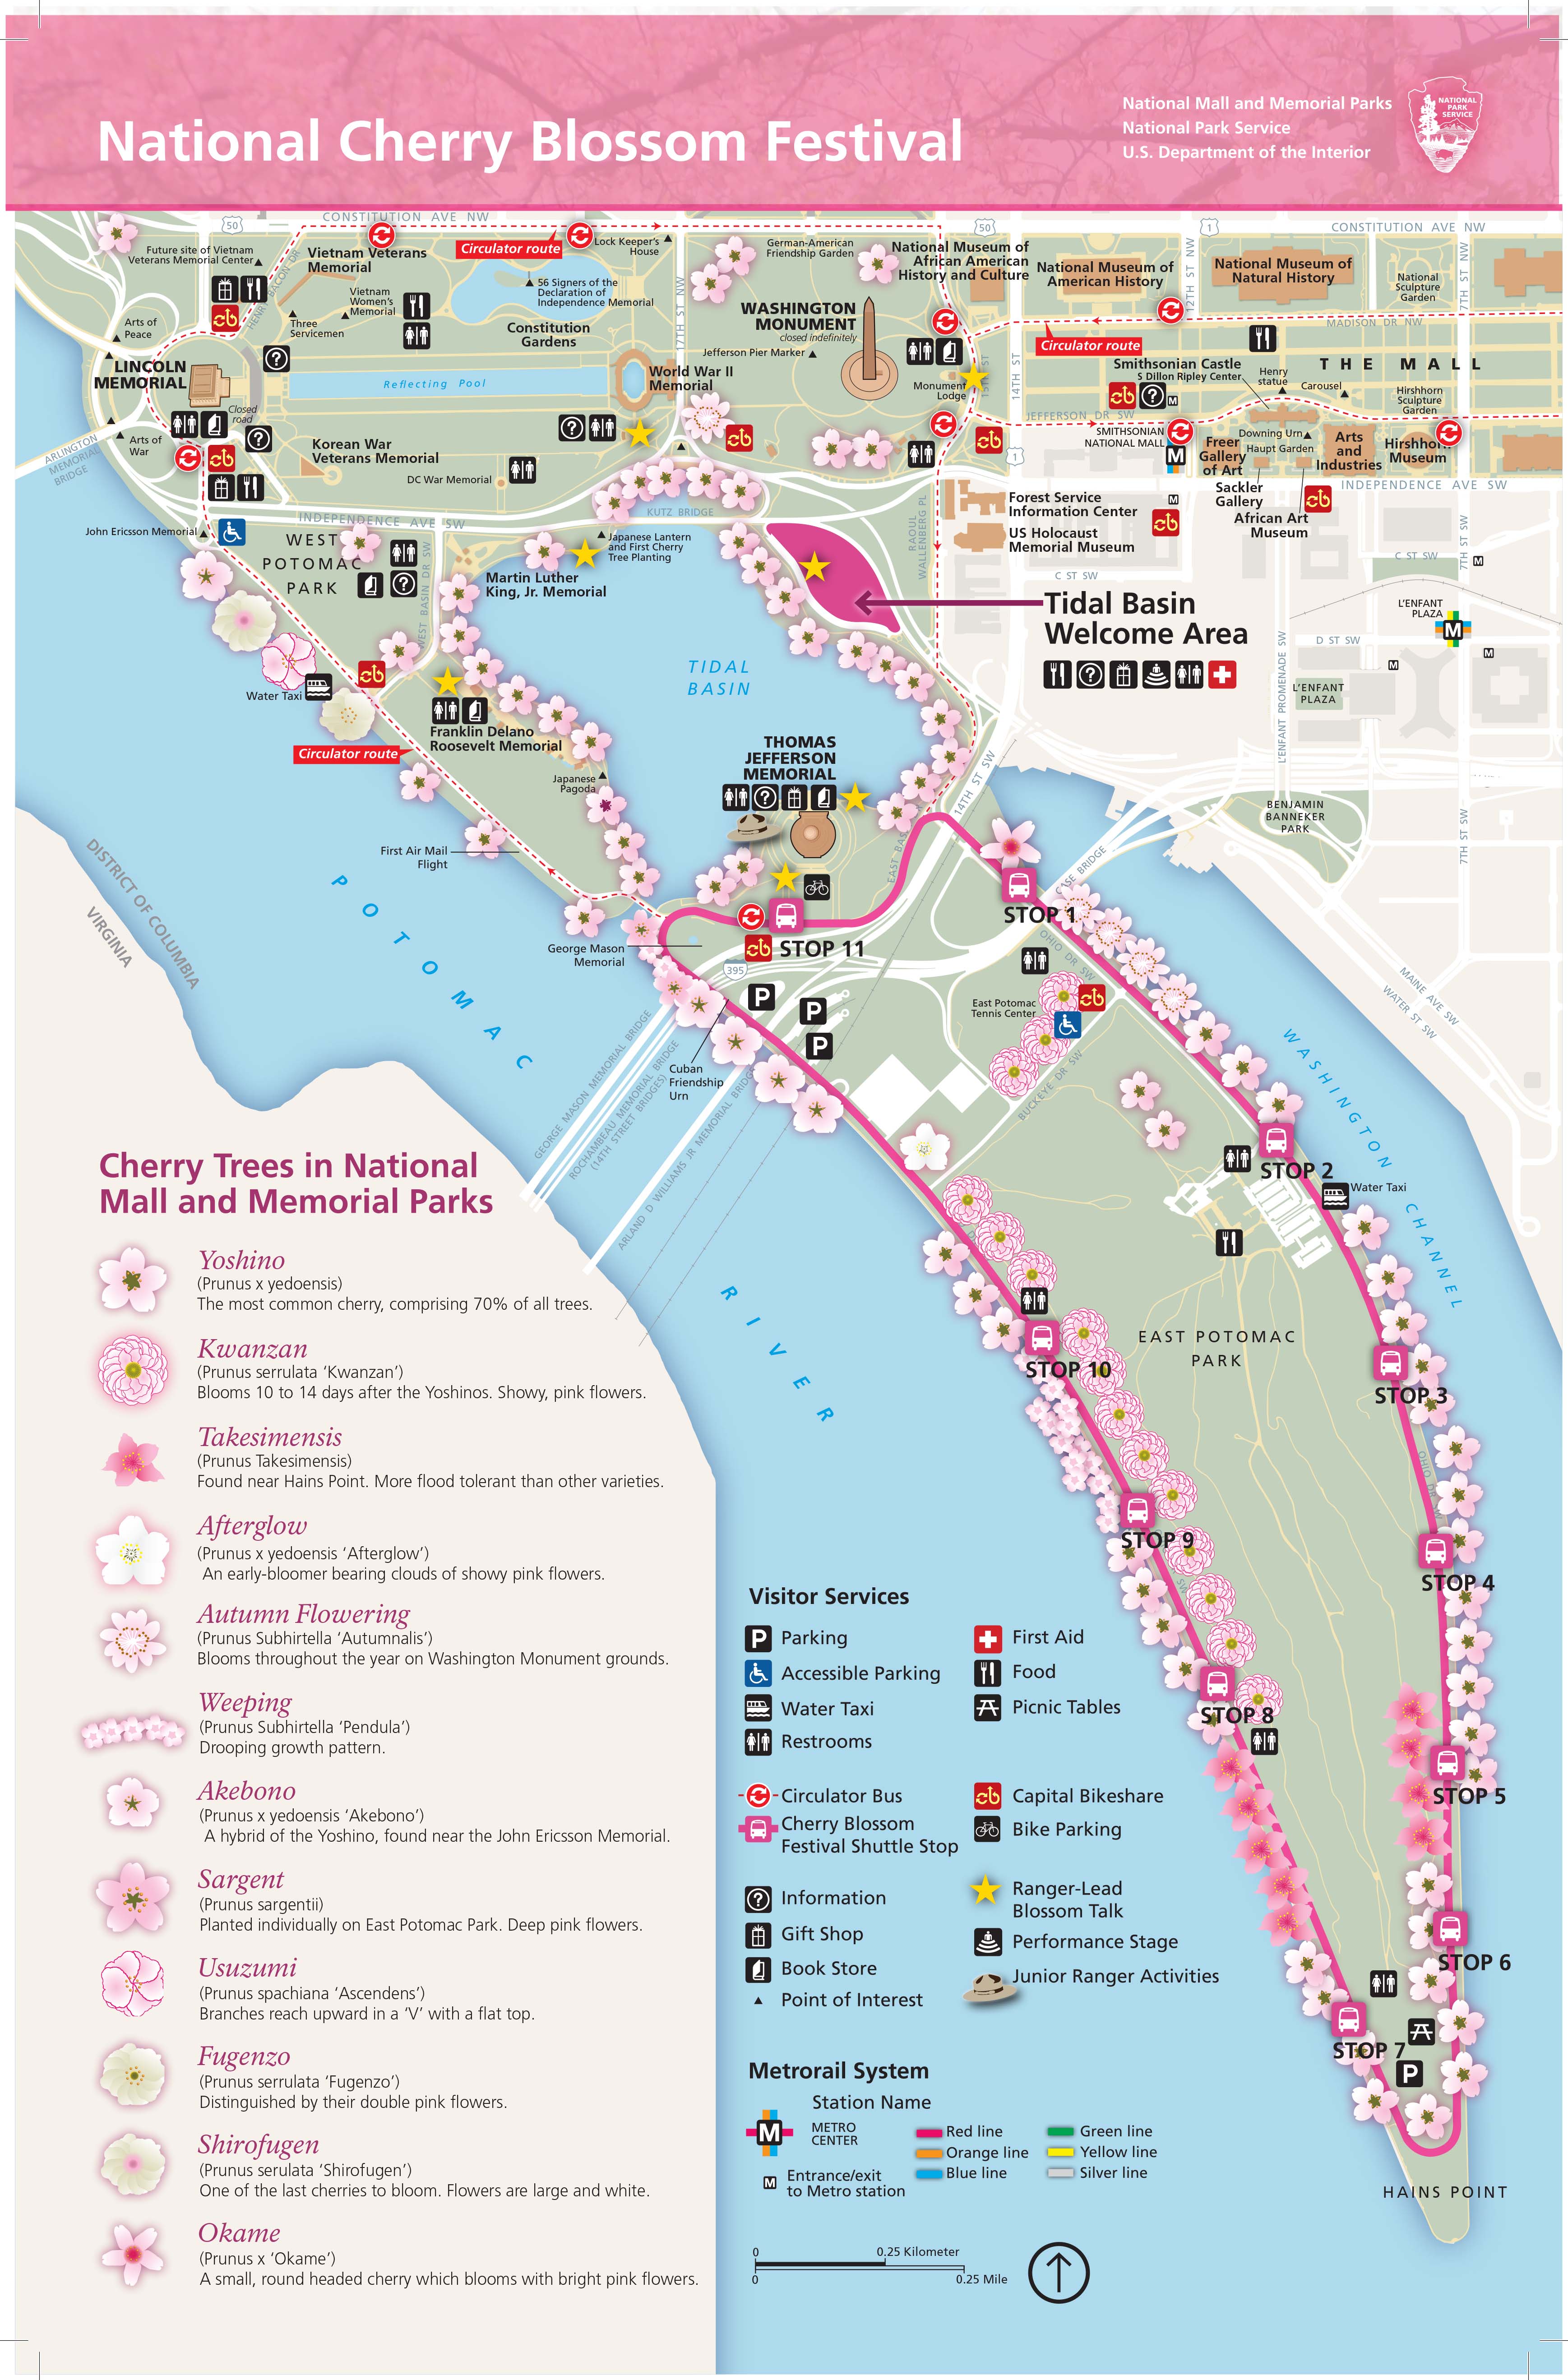 Map of National Cherry Blossom Festival using flowers as an Iconic Symbol, see text above image